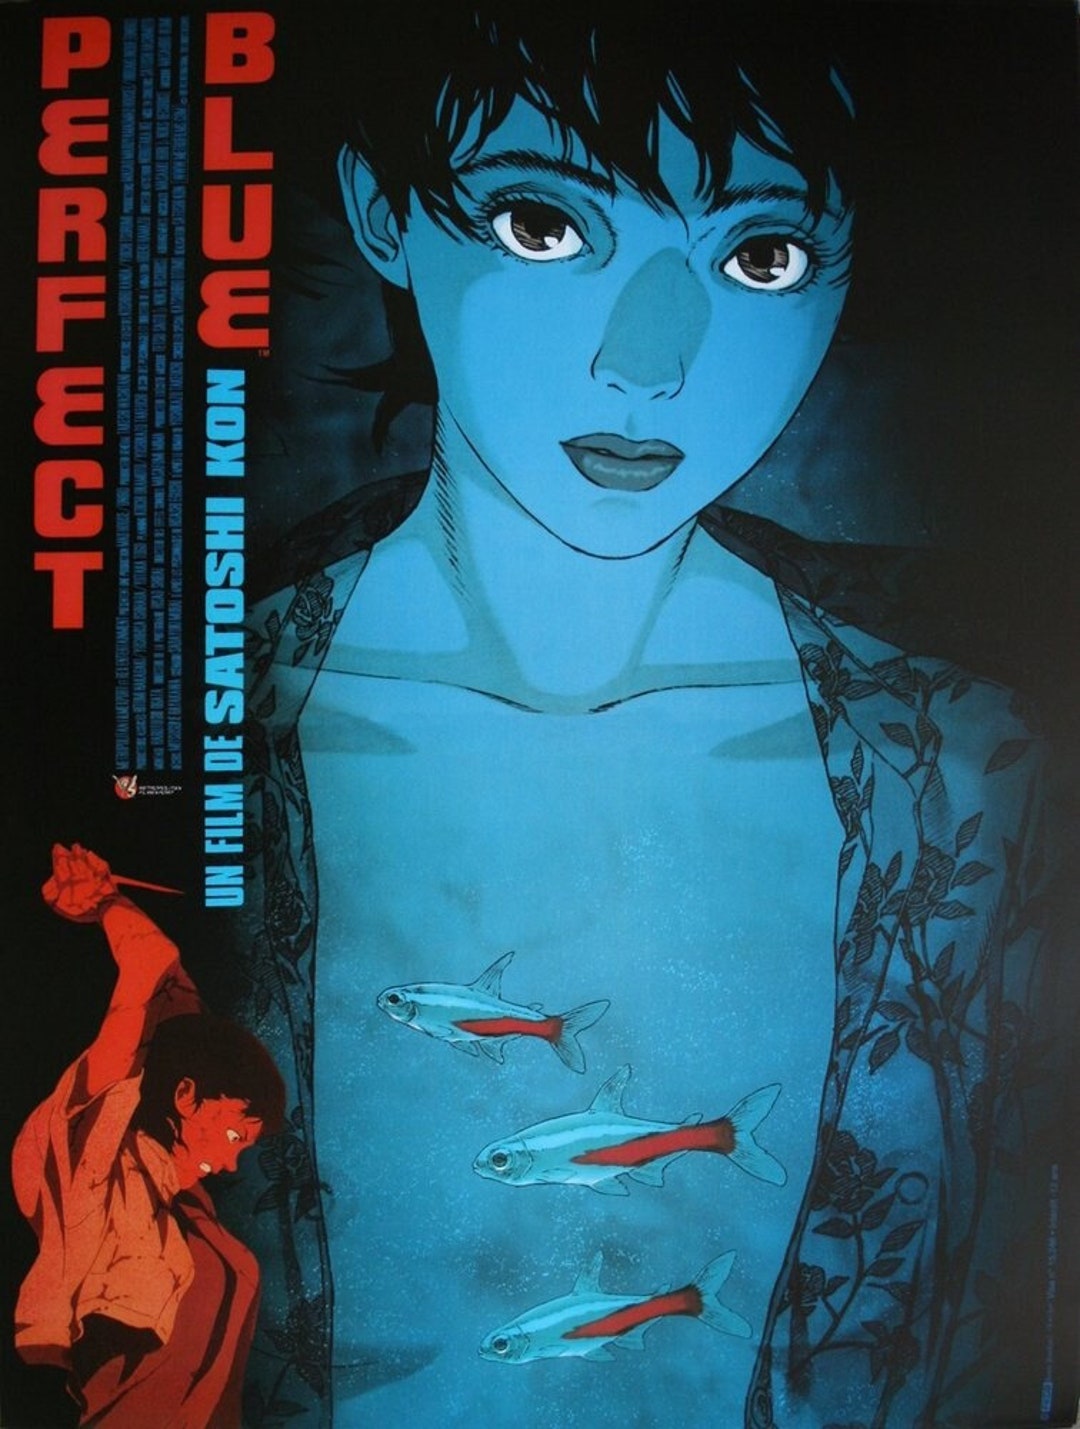 GIVEAWAY] 'Perfect Blue' Tickets and Mini-Poster - Rotoscopers